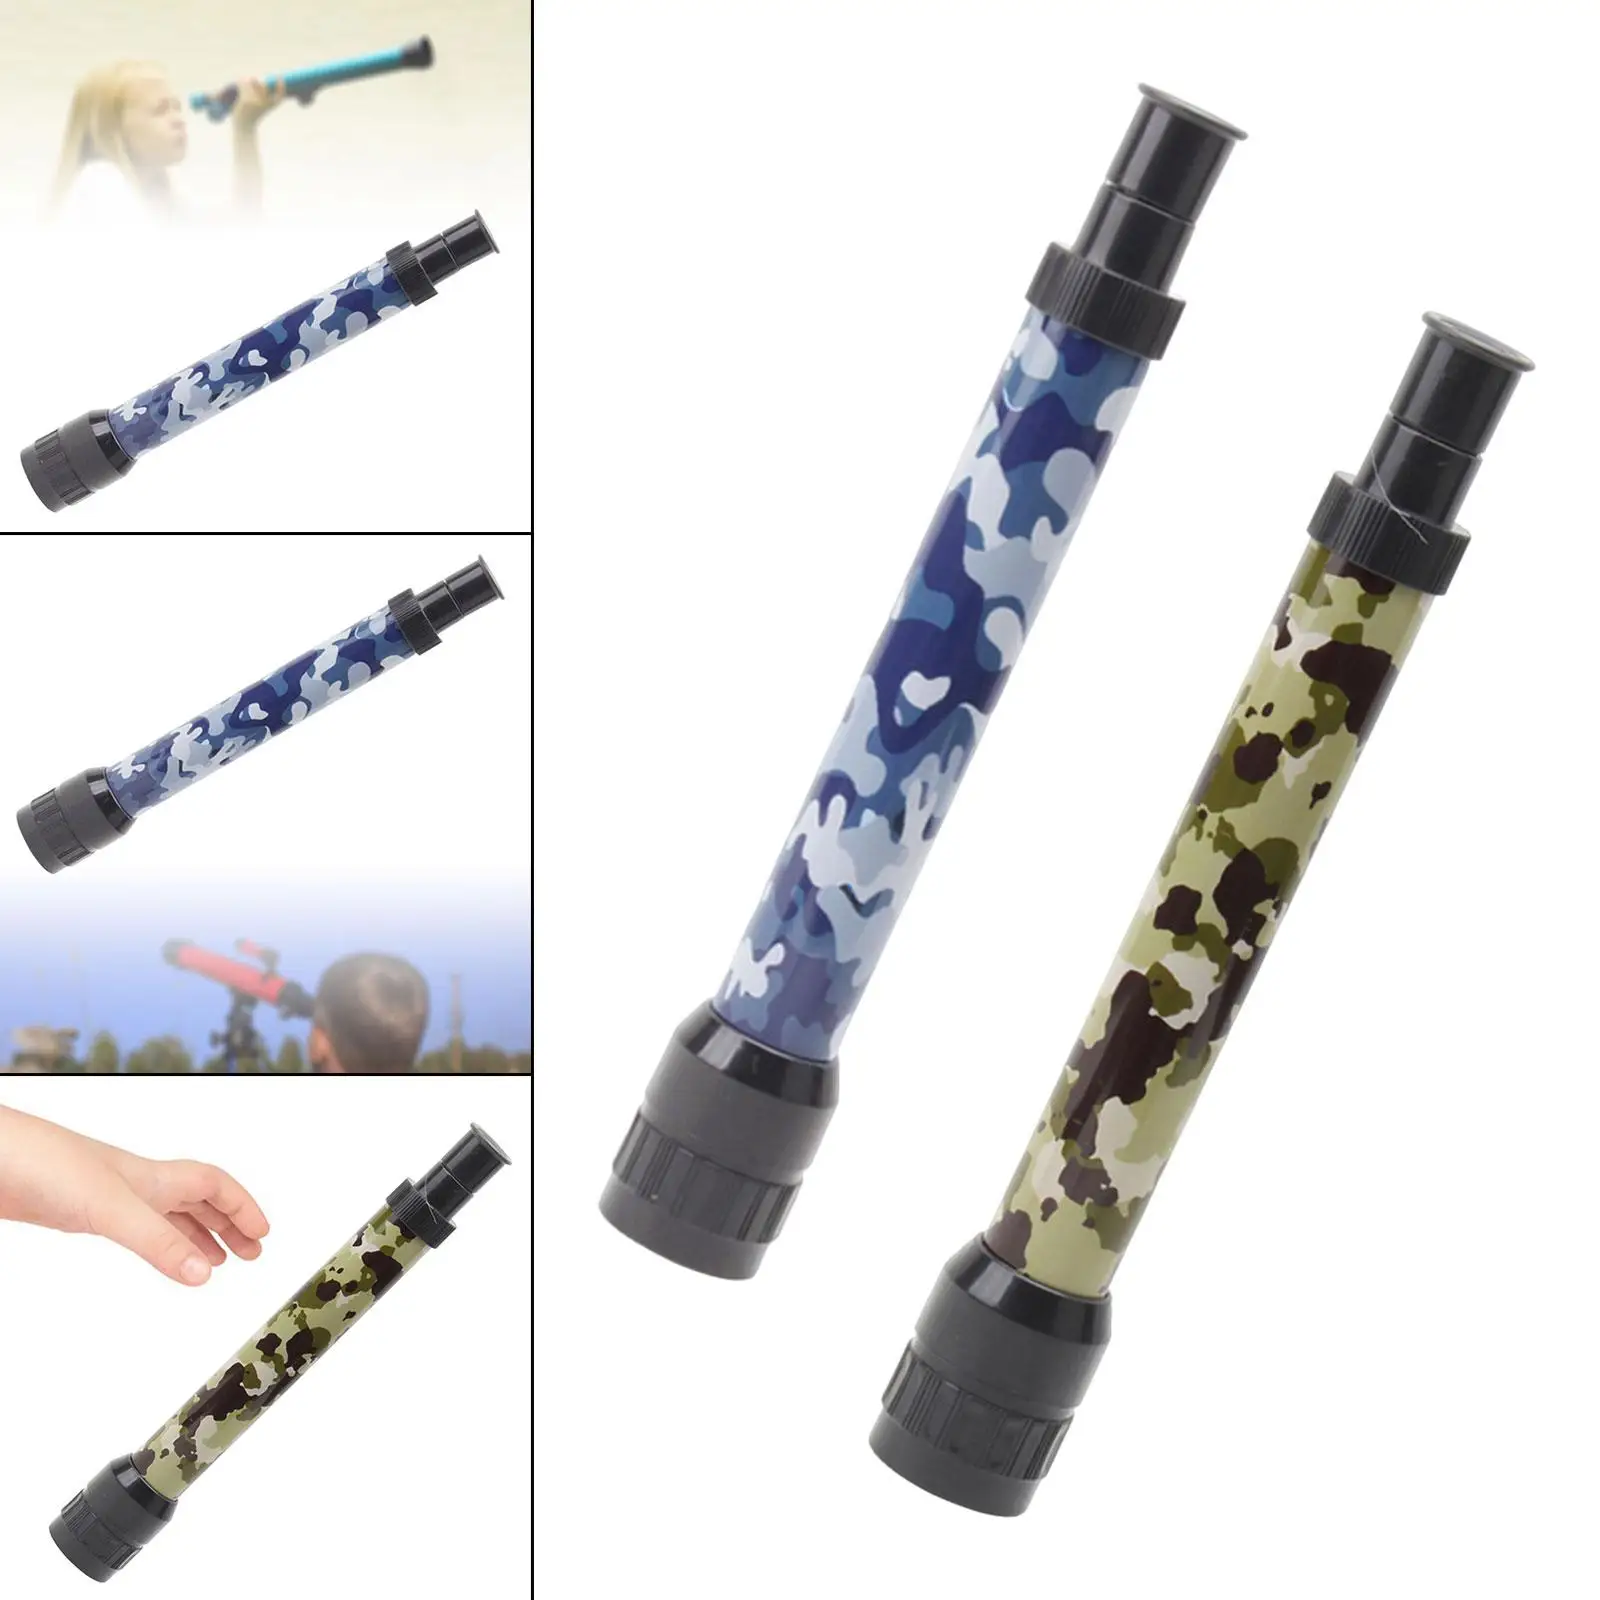 Telescopic Spyglass Science High Resolution Children Magnification Toy for Camping Hiking Party Favors Presents Birthday